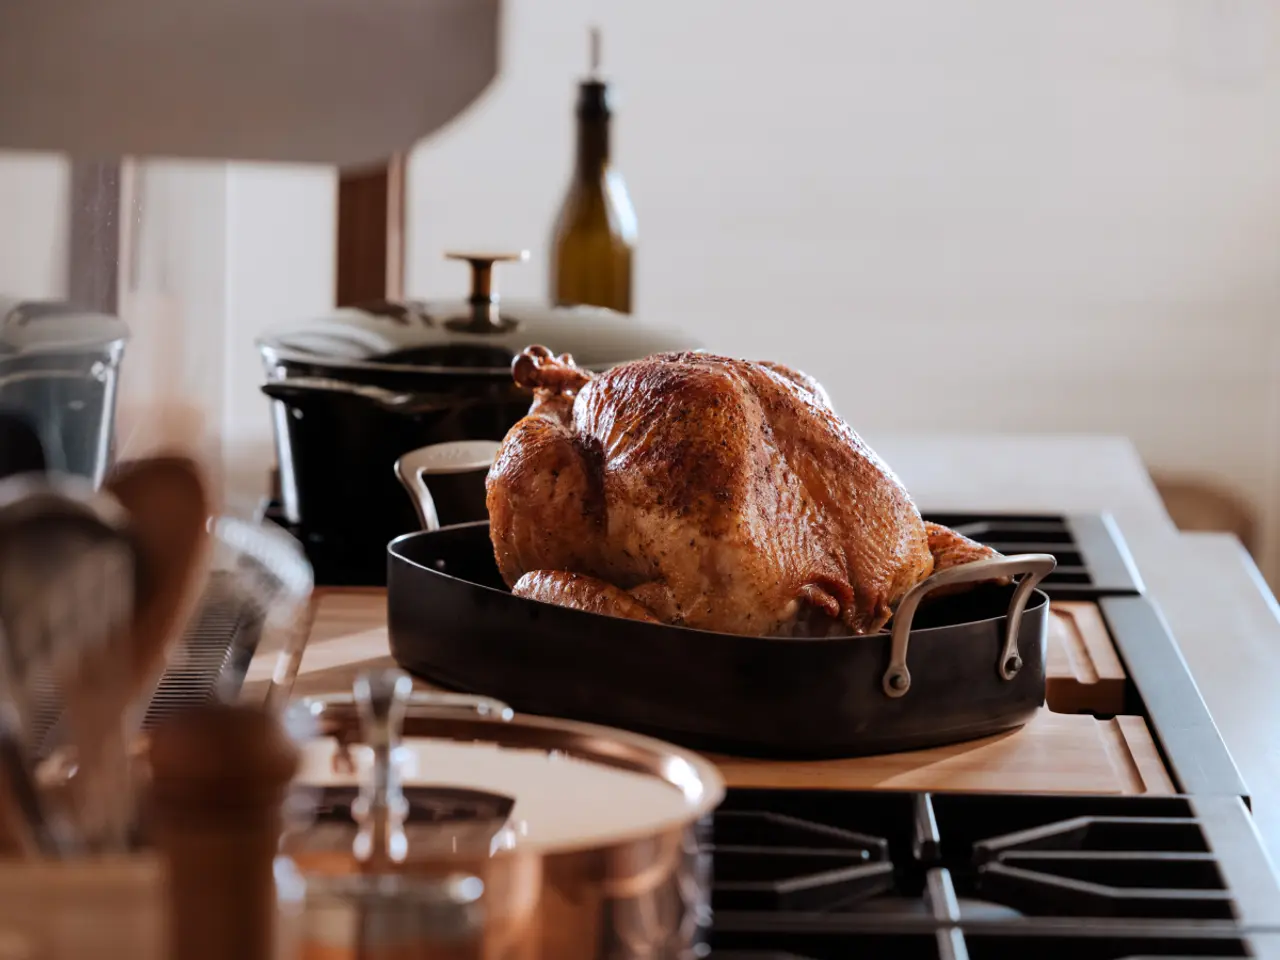 A roasted turkey in a roasting pan on a stove surrounded by cooking utensils, hinting at a holiday or festive meal preparation.